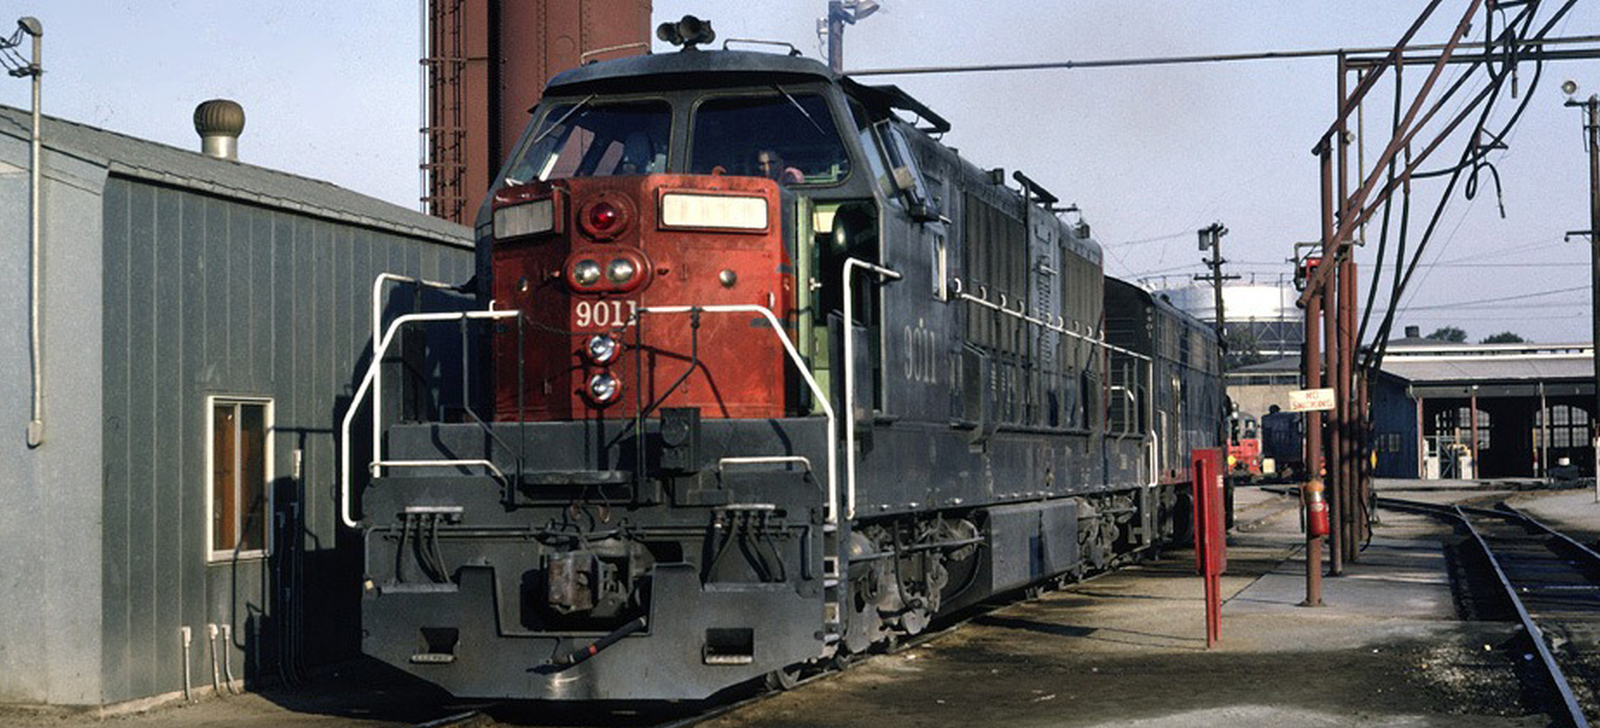 Southern Pacific No. 9011 in August 1964 at San Jose, California